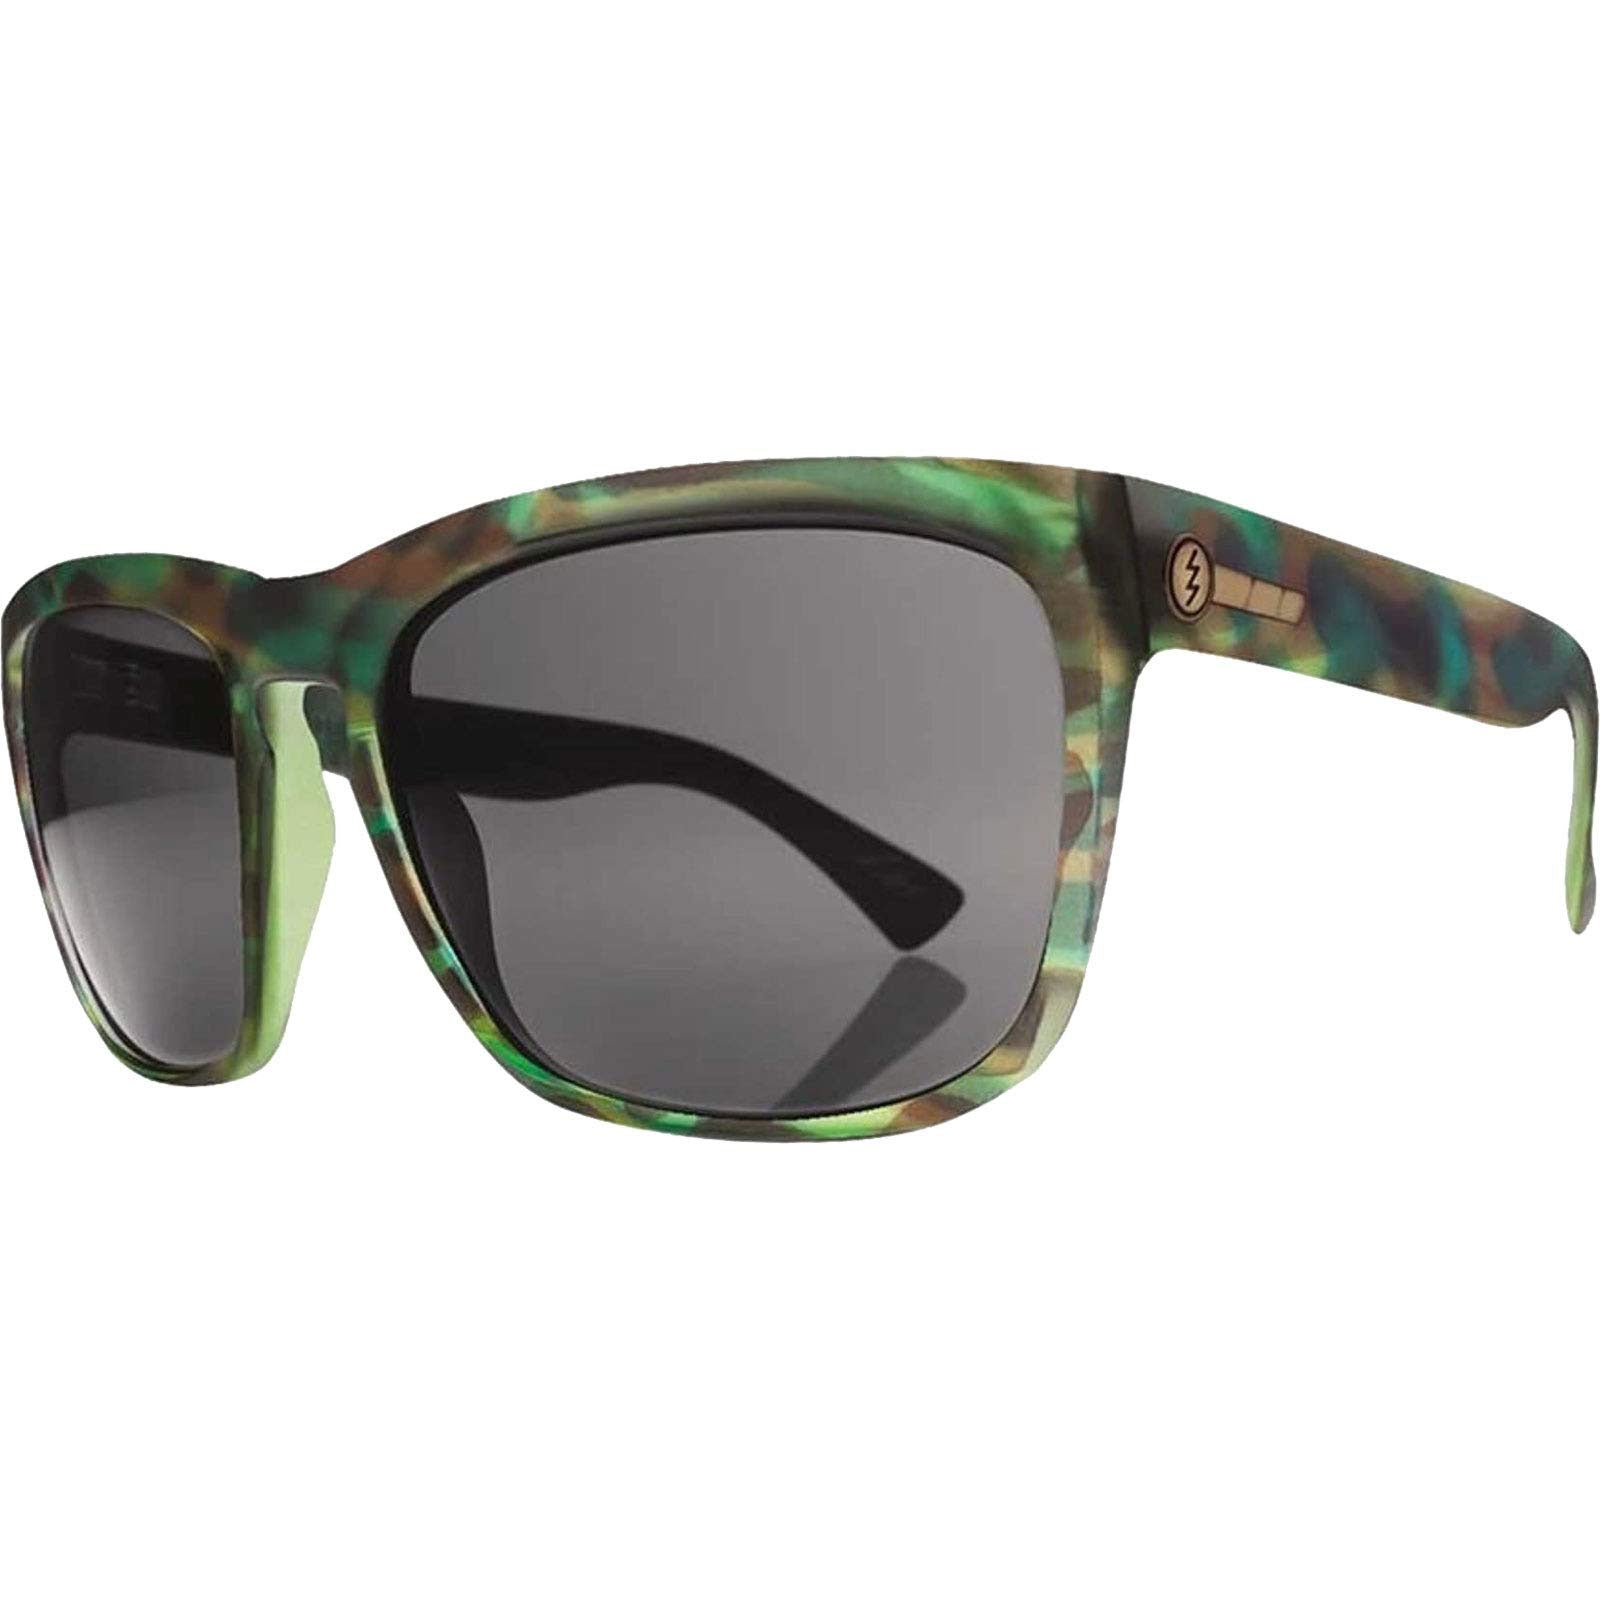 Electric Knoxville Men's Lifestyle Sunglasses